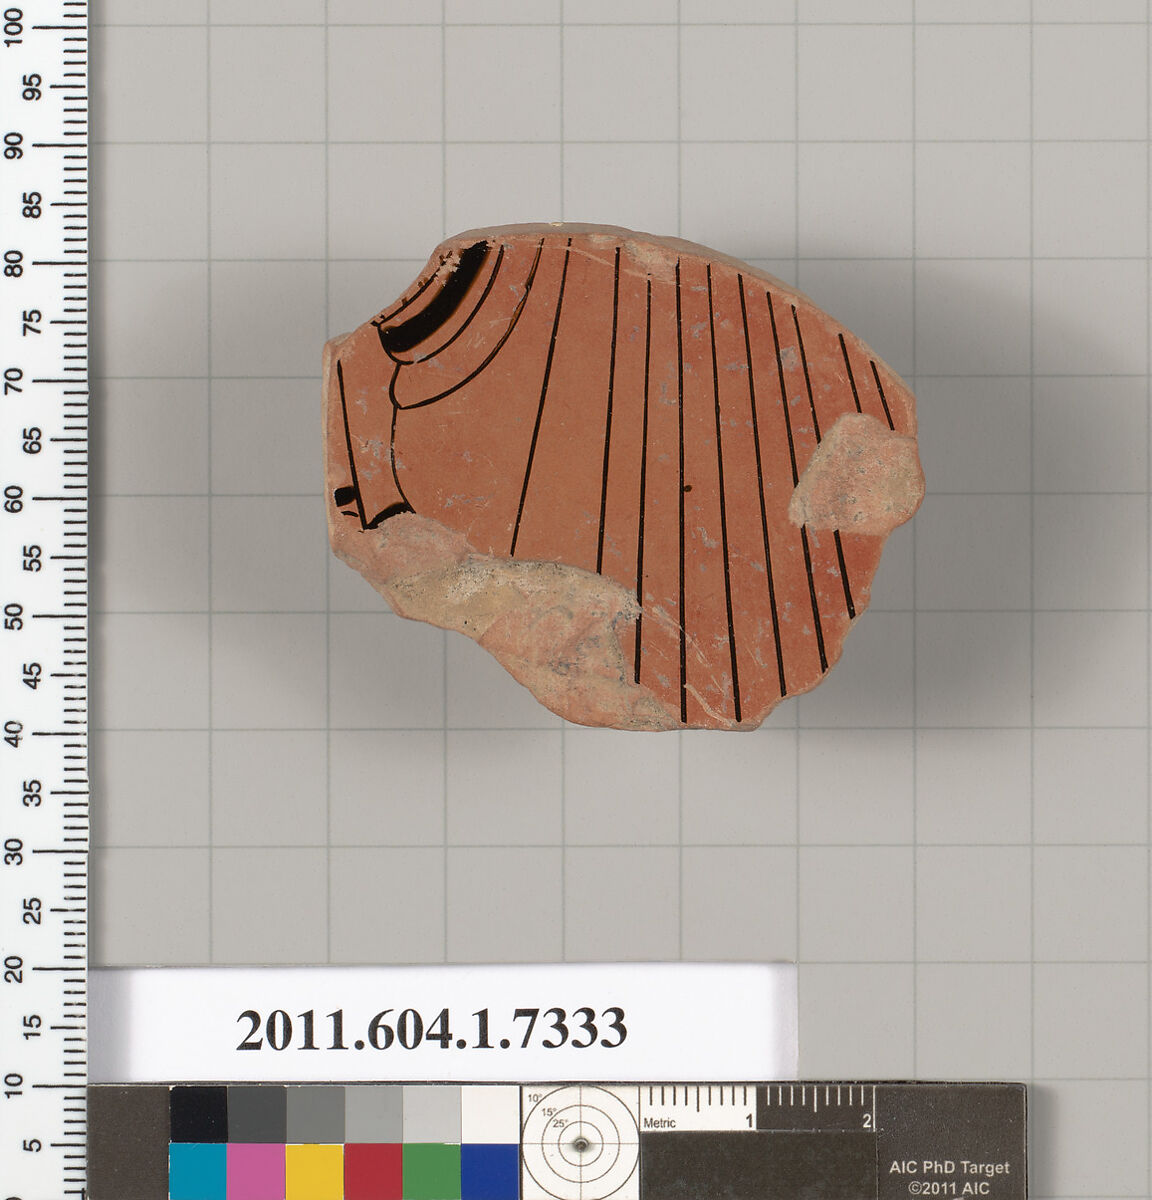 Terracotta fragment of a kylix (drinking cup), Attributed to Douris ? [DvB], Terracotta, Greek, Attic 